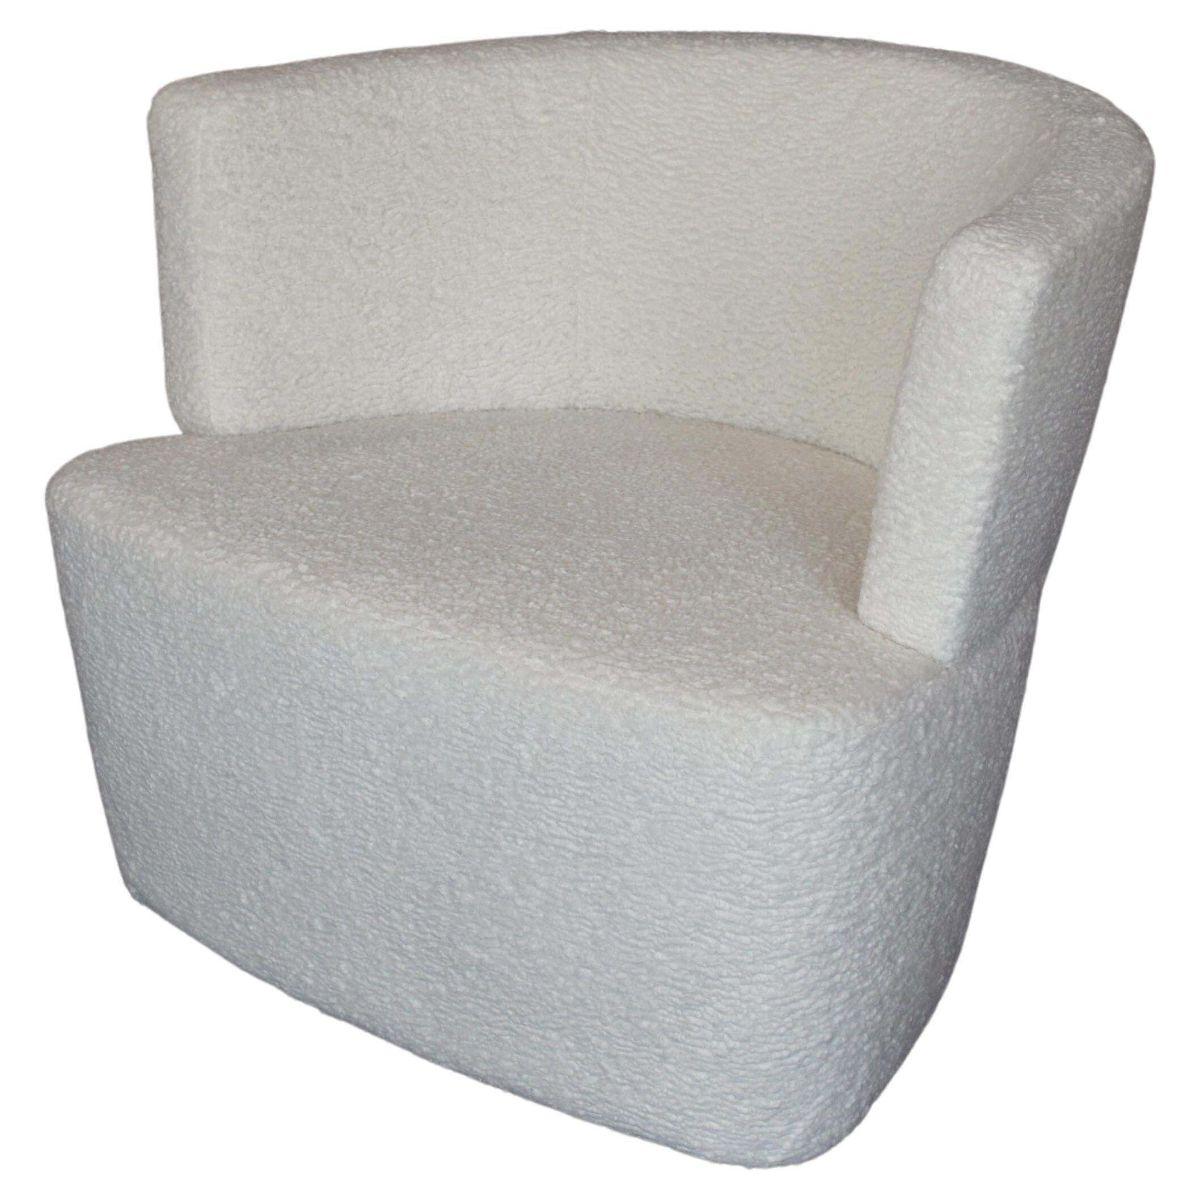 American White Cotton Swivel Modern Chair Set by Coalesse For Sale